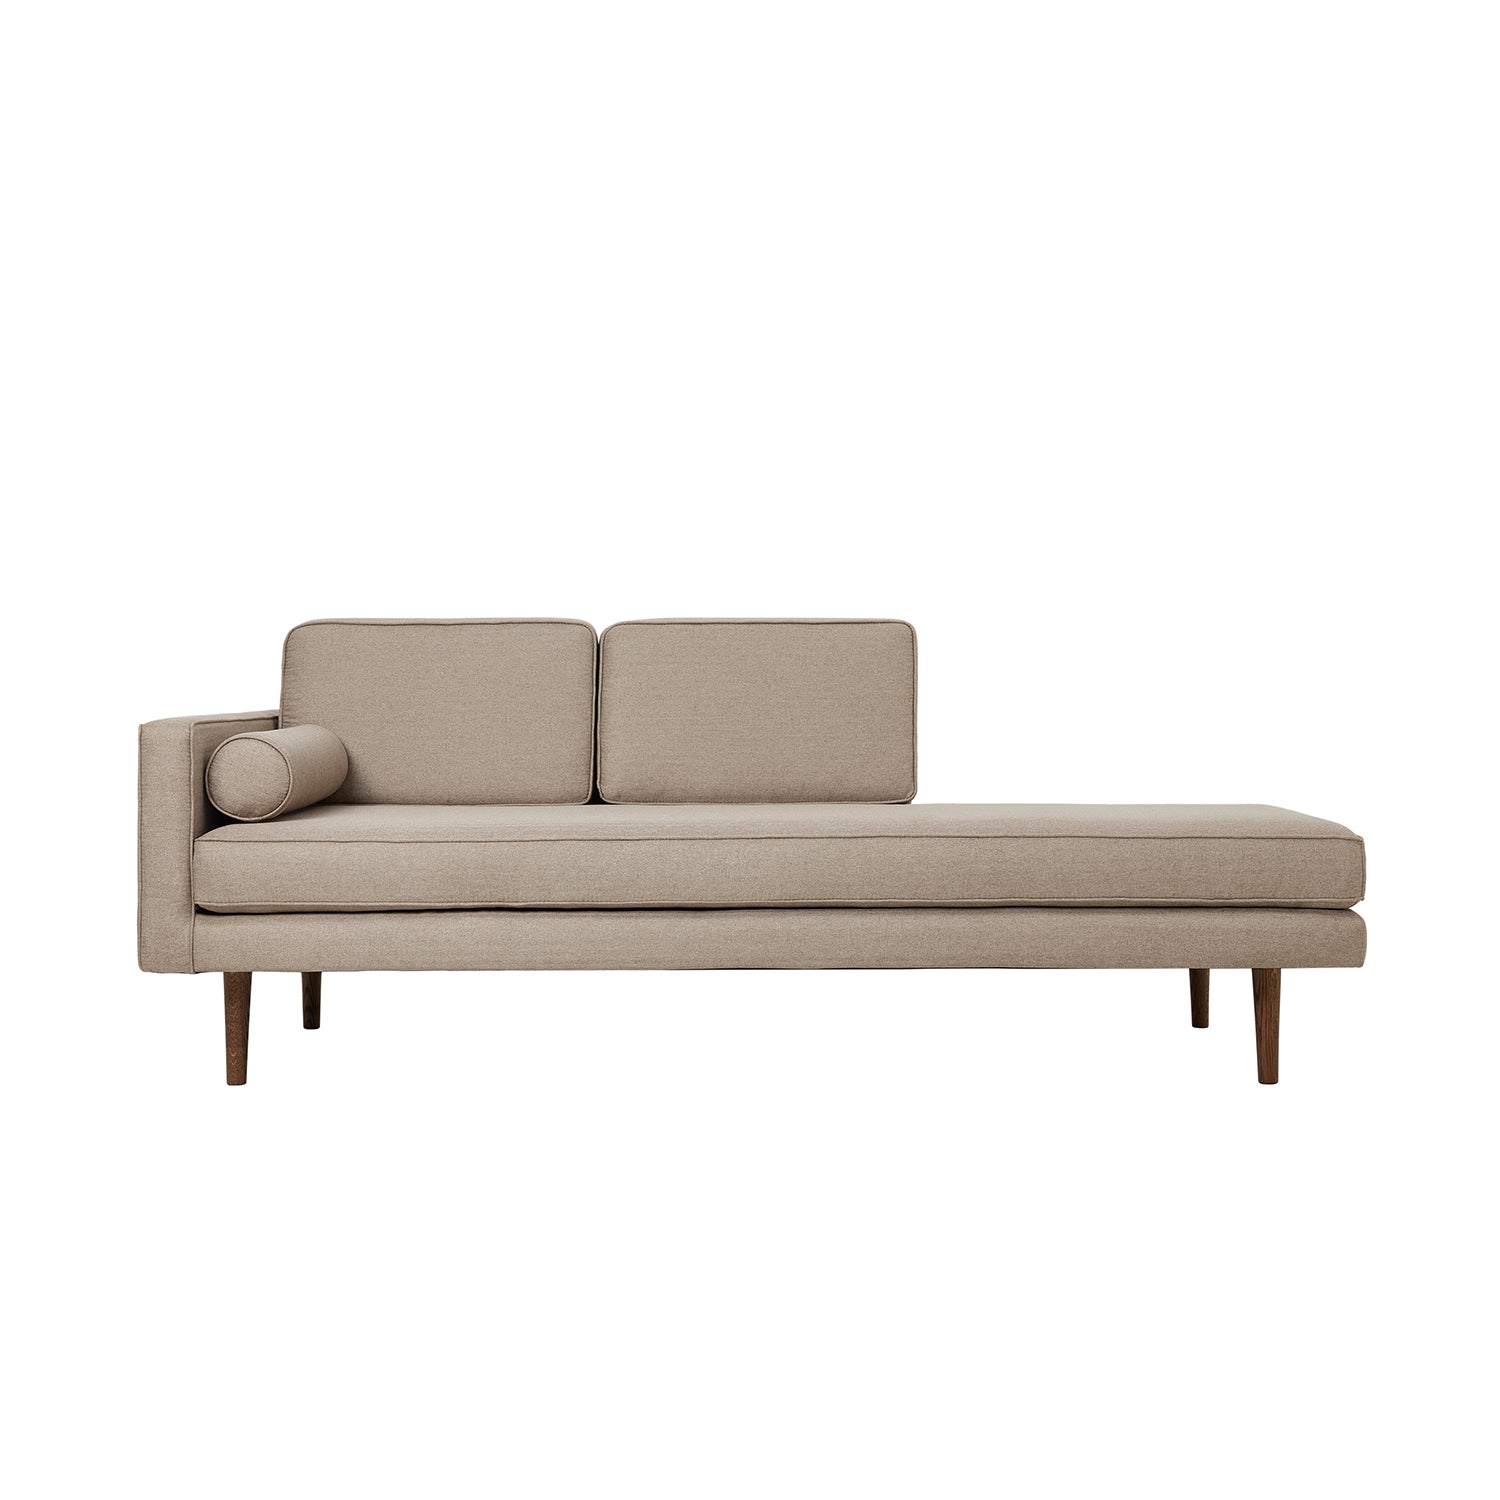 Wind Chaise Longue - The Design Choice